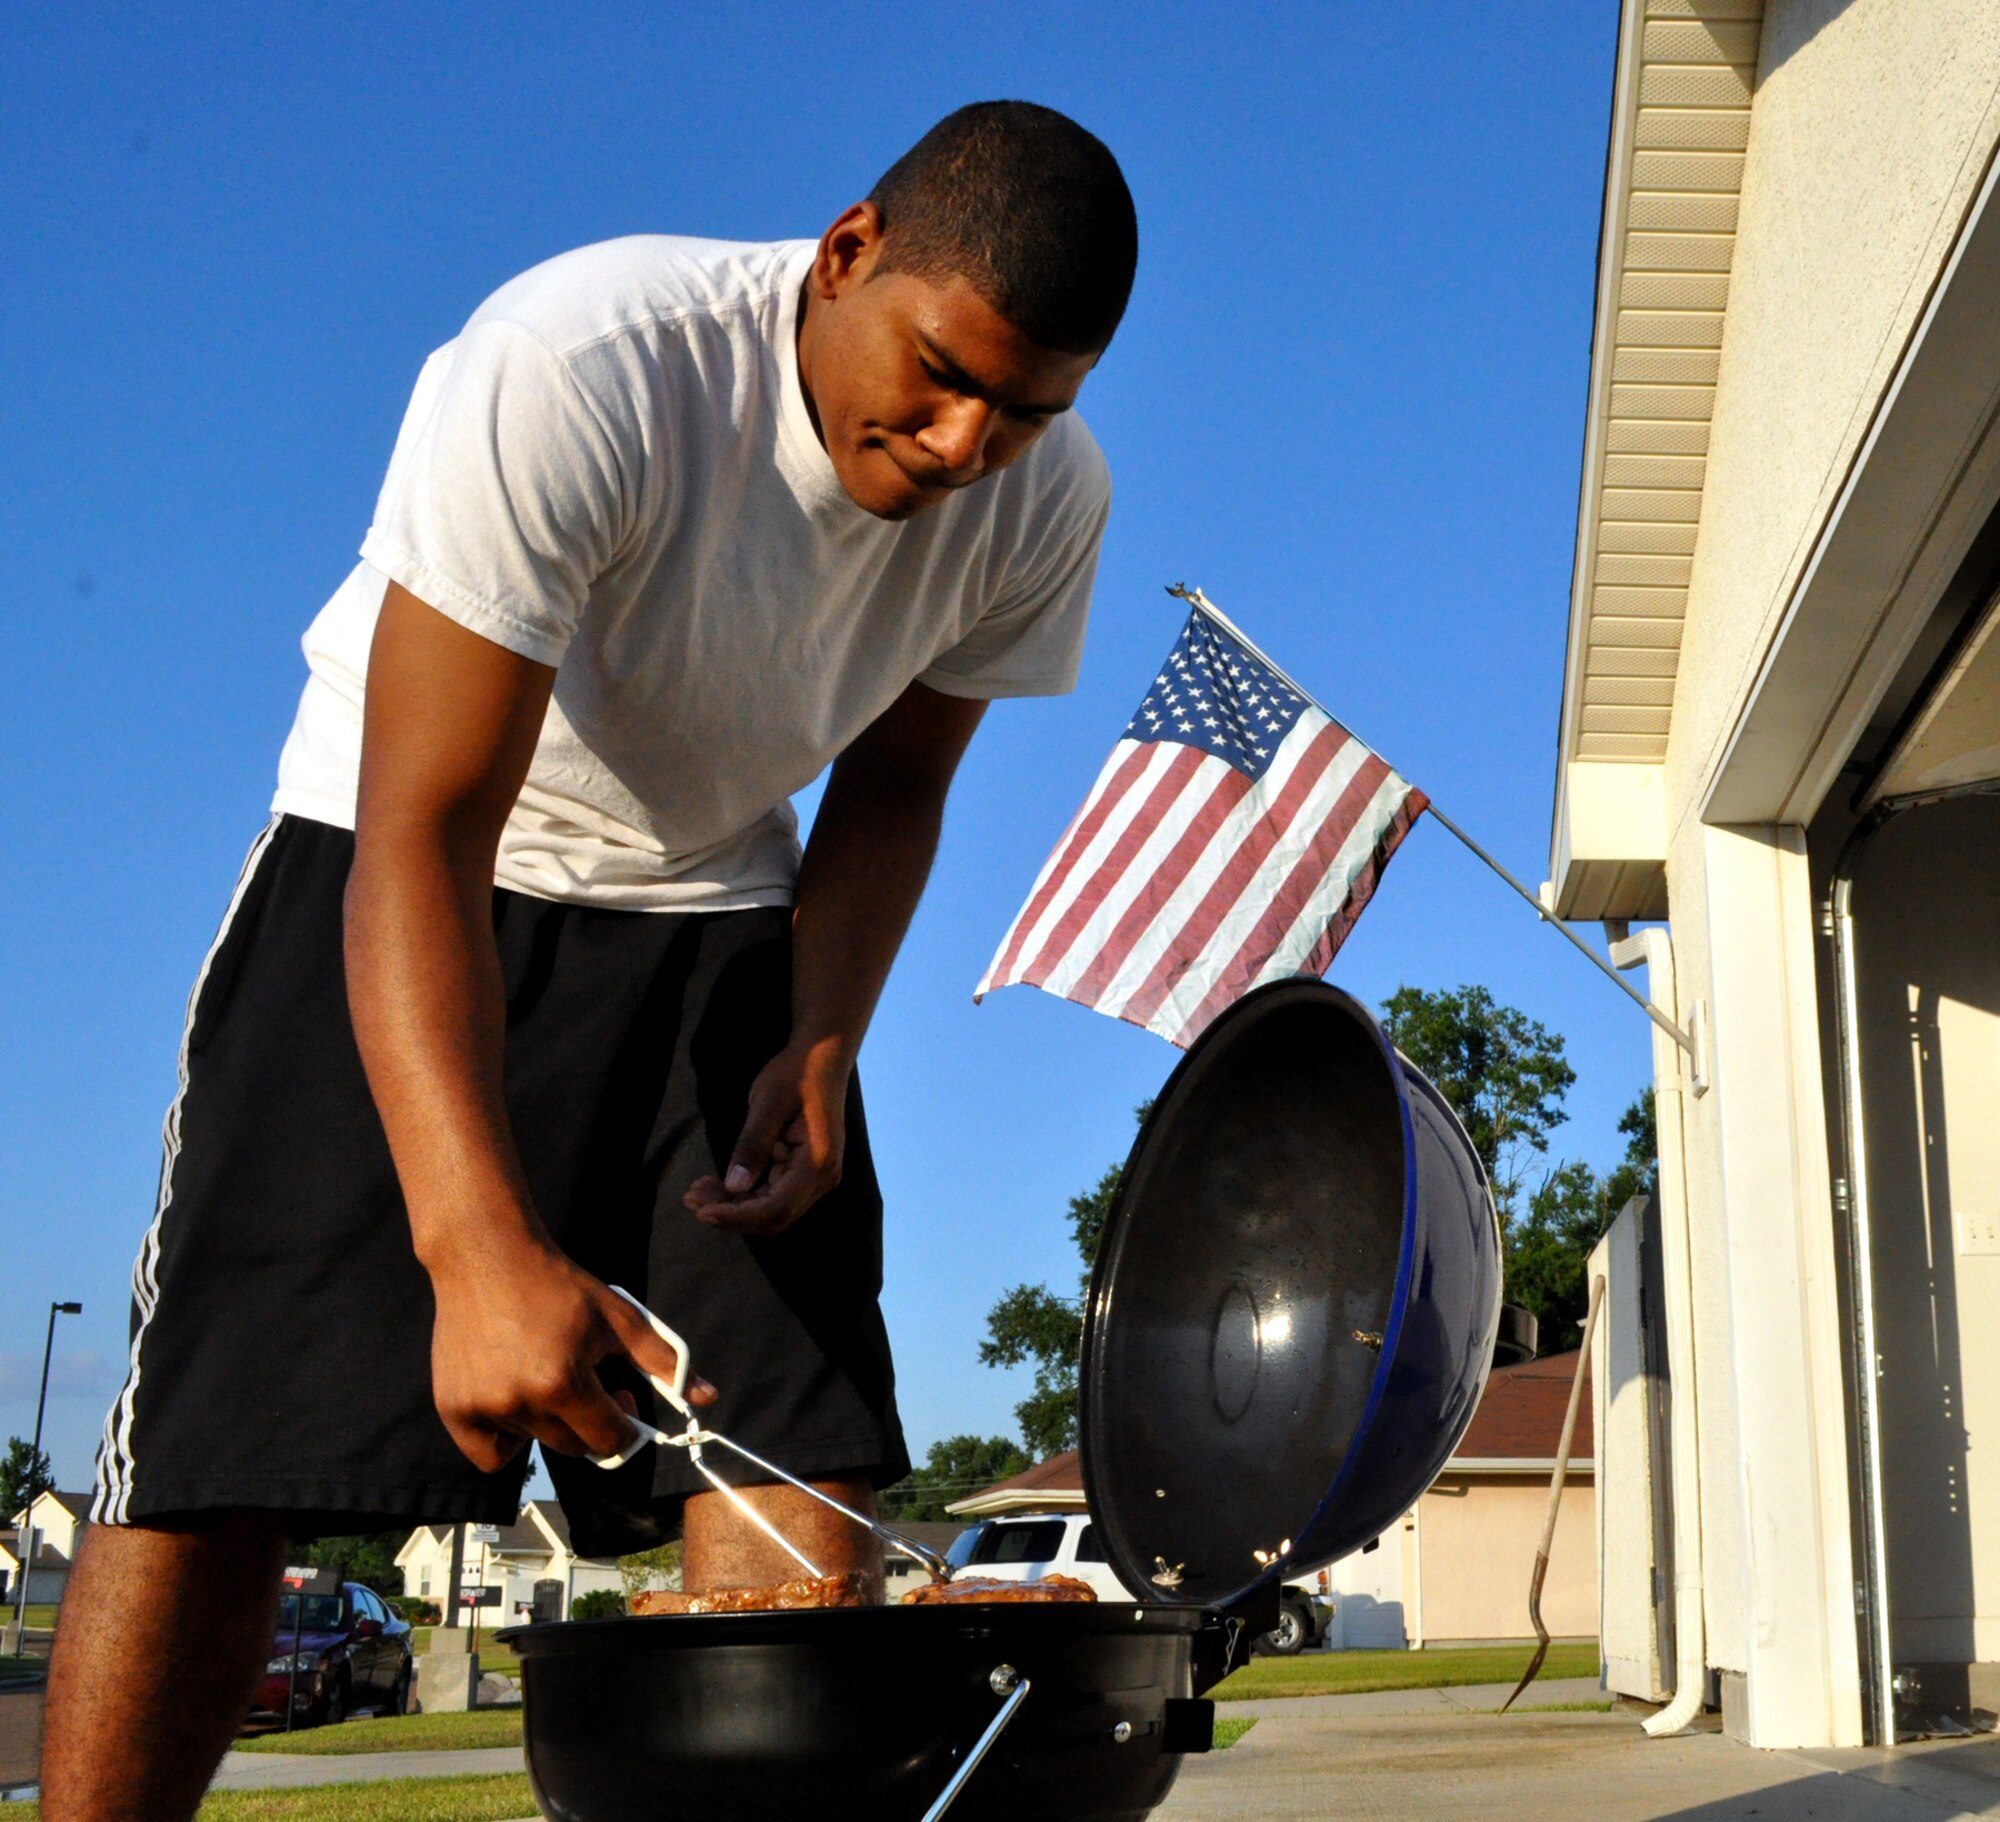 Senior Airman Marquis Skinner, a communications focal point technician with the 14th Communications Squadron, grills steaks in front of his home in here on base July 4. (U.S. Air Force photo/Airman 1st Class Chase Hedrick)